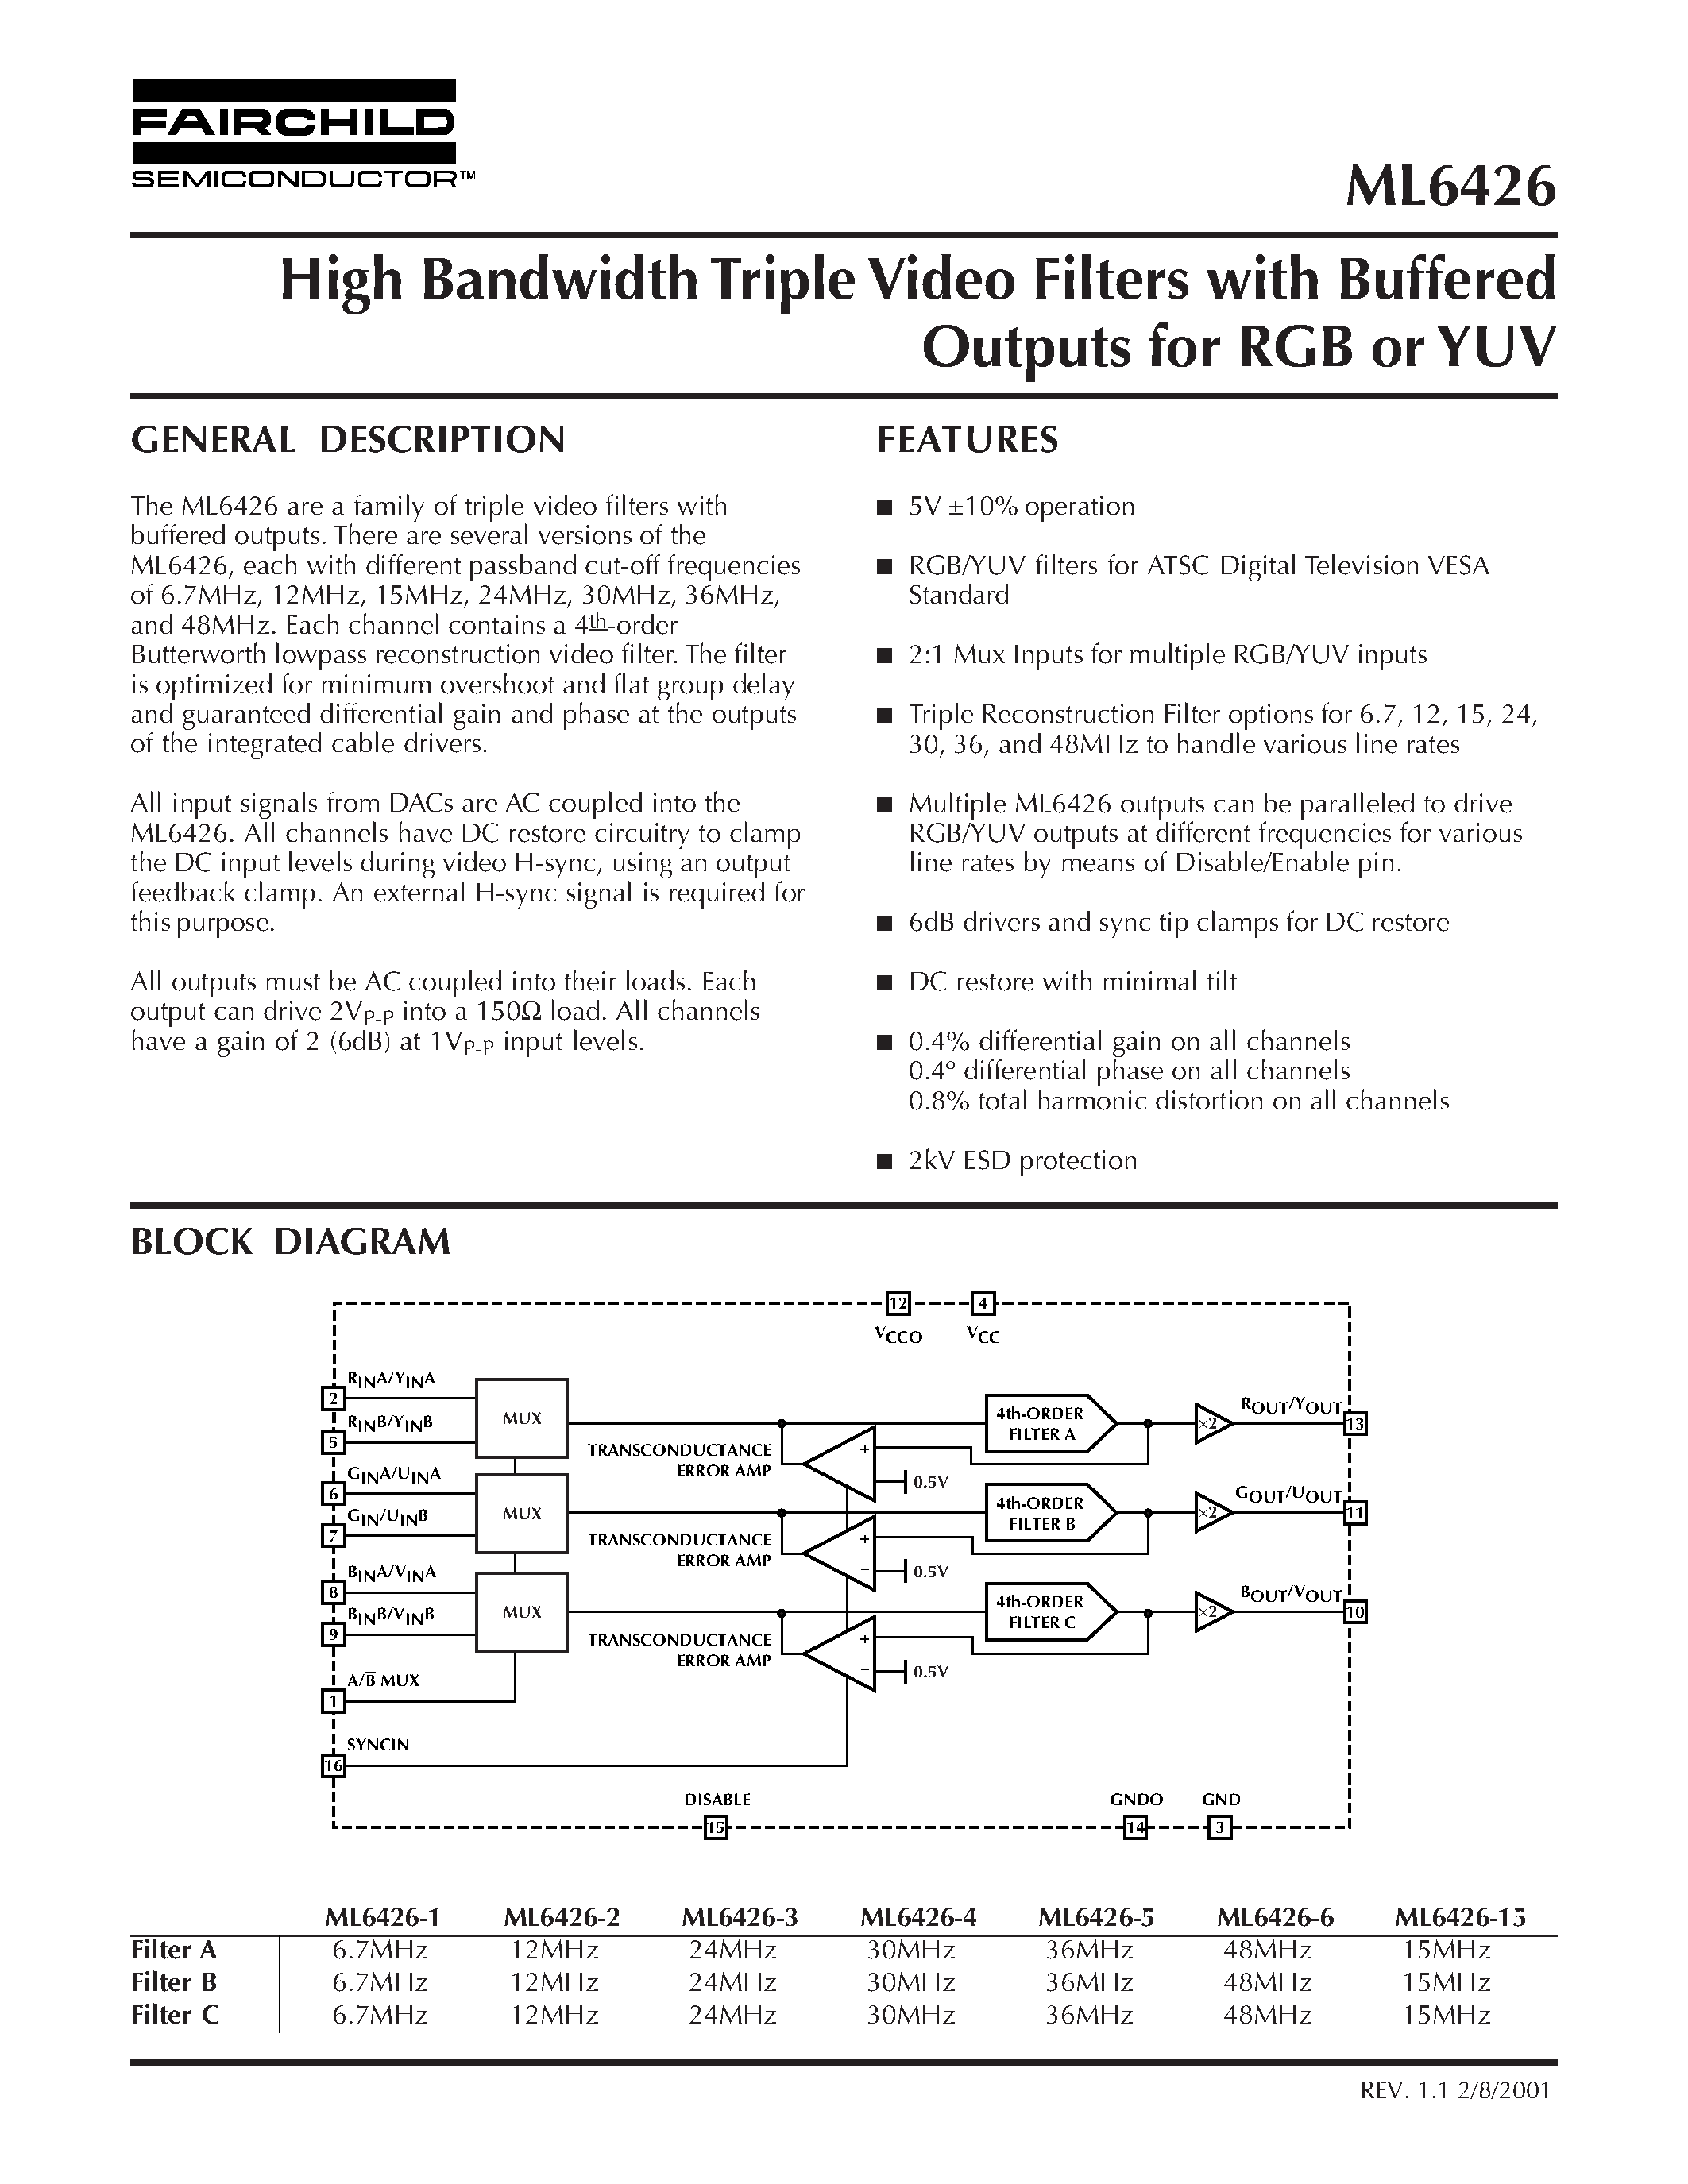 Datasheet ML6426CS-6 - High Bandwidth Triple Video Filters with Buffered Outputs for RGB or YUV page 1